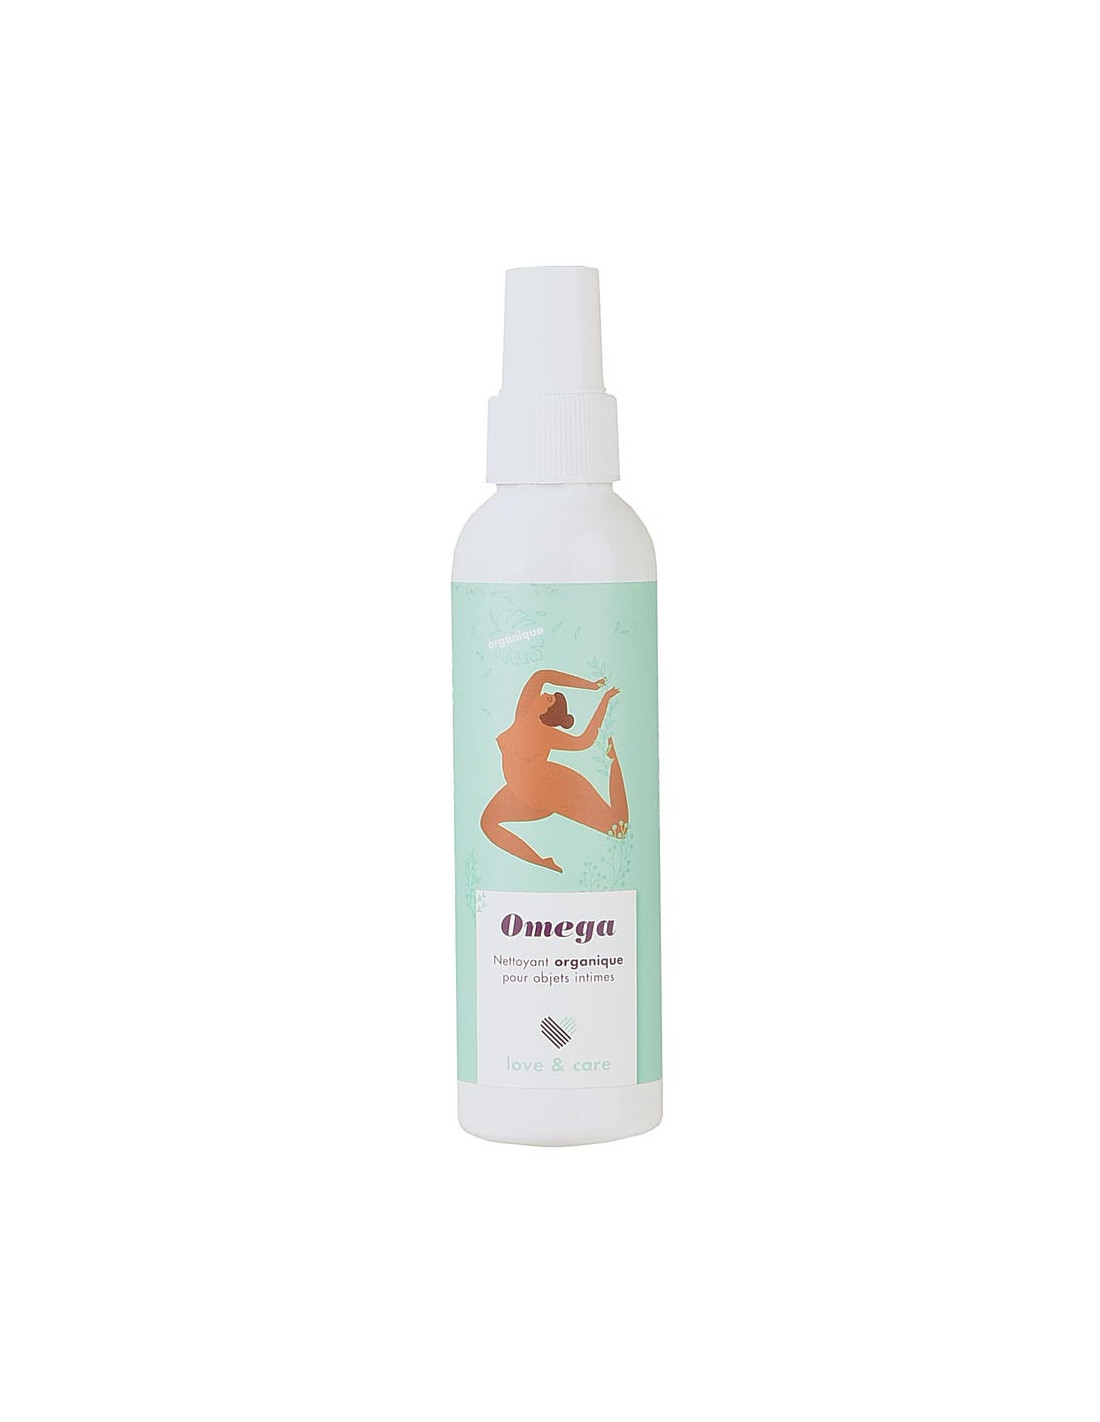 Love and Care Nettoyant naturel Omega 2aUKqefz